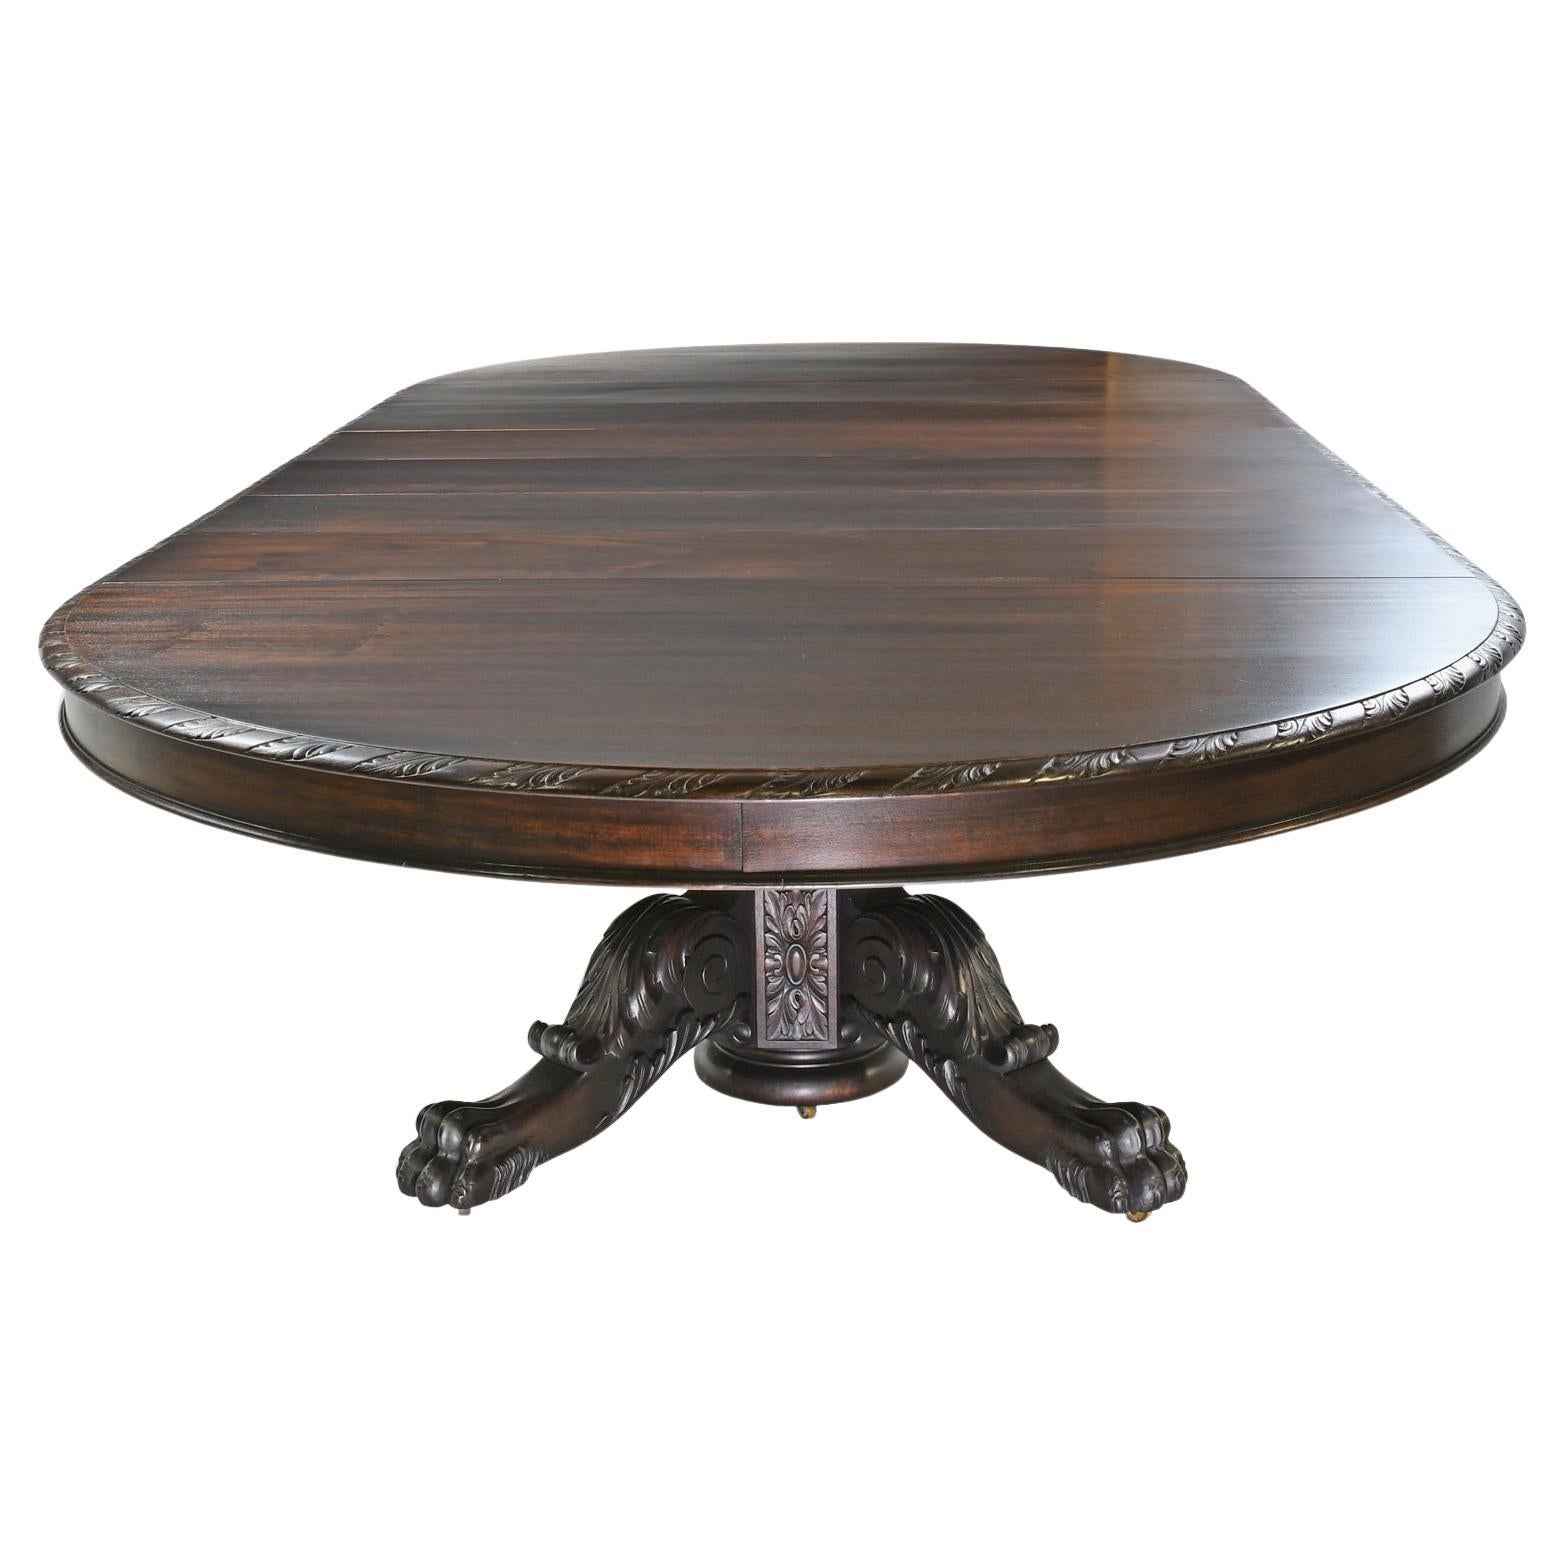 From the American Belle Époque,  referred to as the gilded age a beautiful round extension dining table that opens to a racetrack with six leaves that lengthen it from a 5 1/2 foot round to 12 foot long. Table rests on a pedestal with legs with